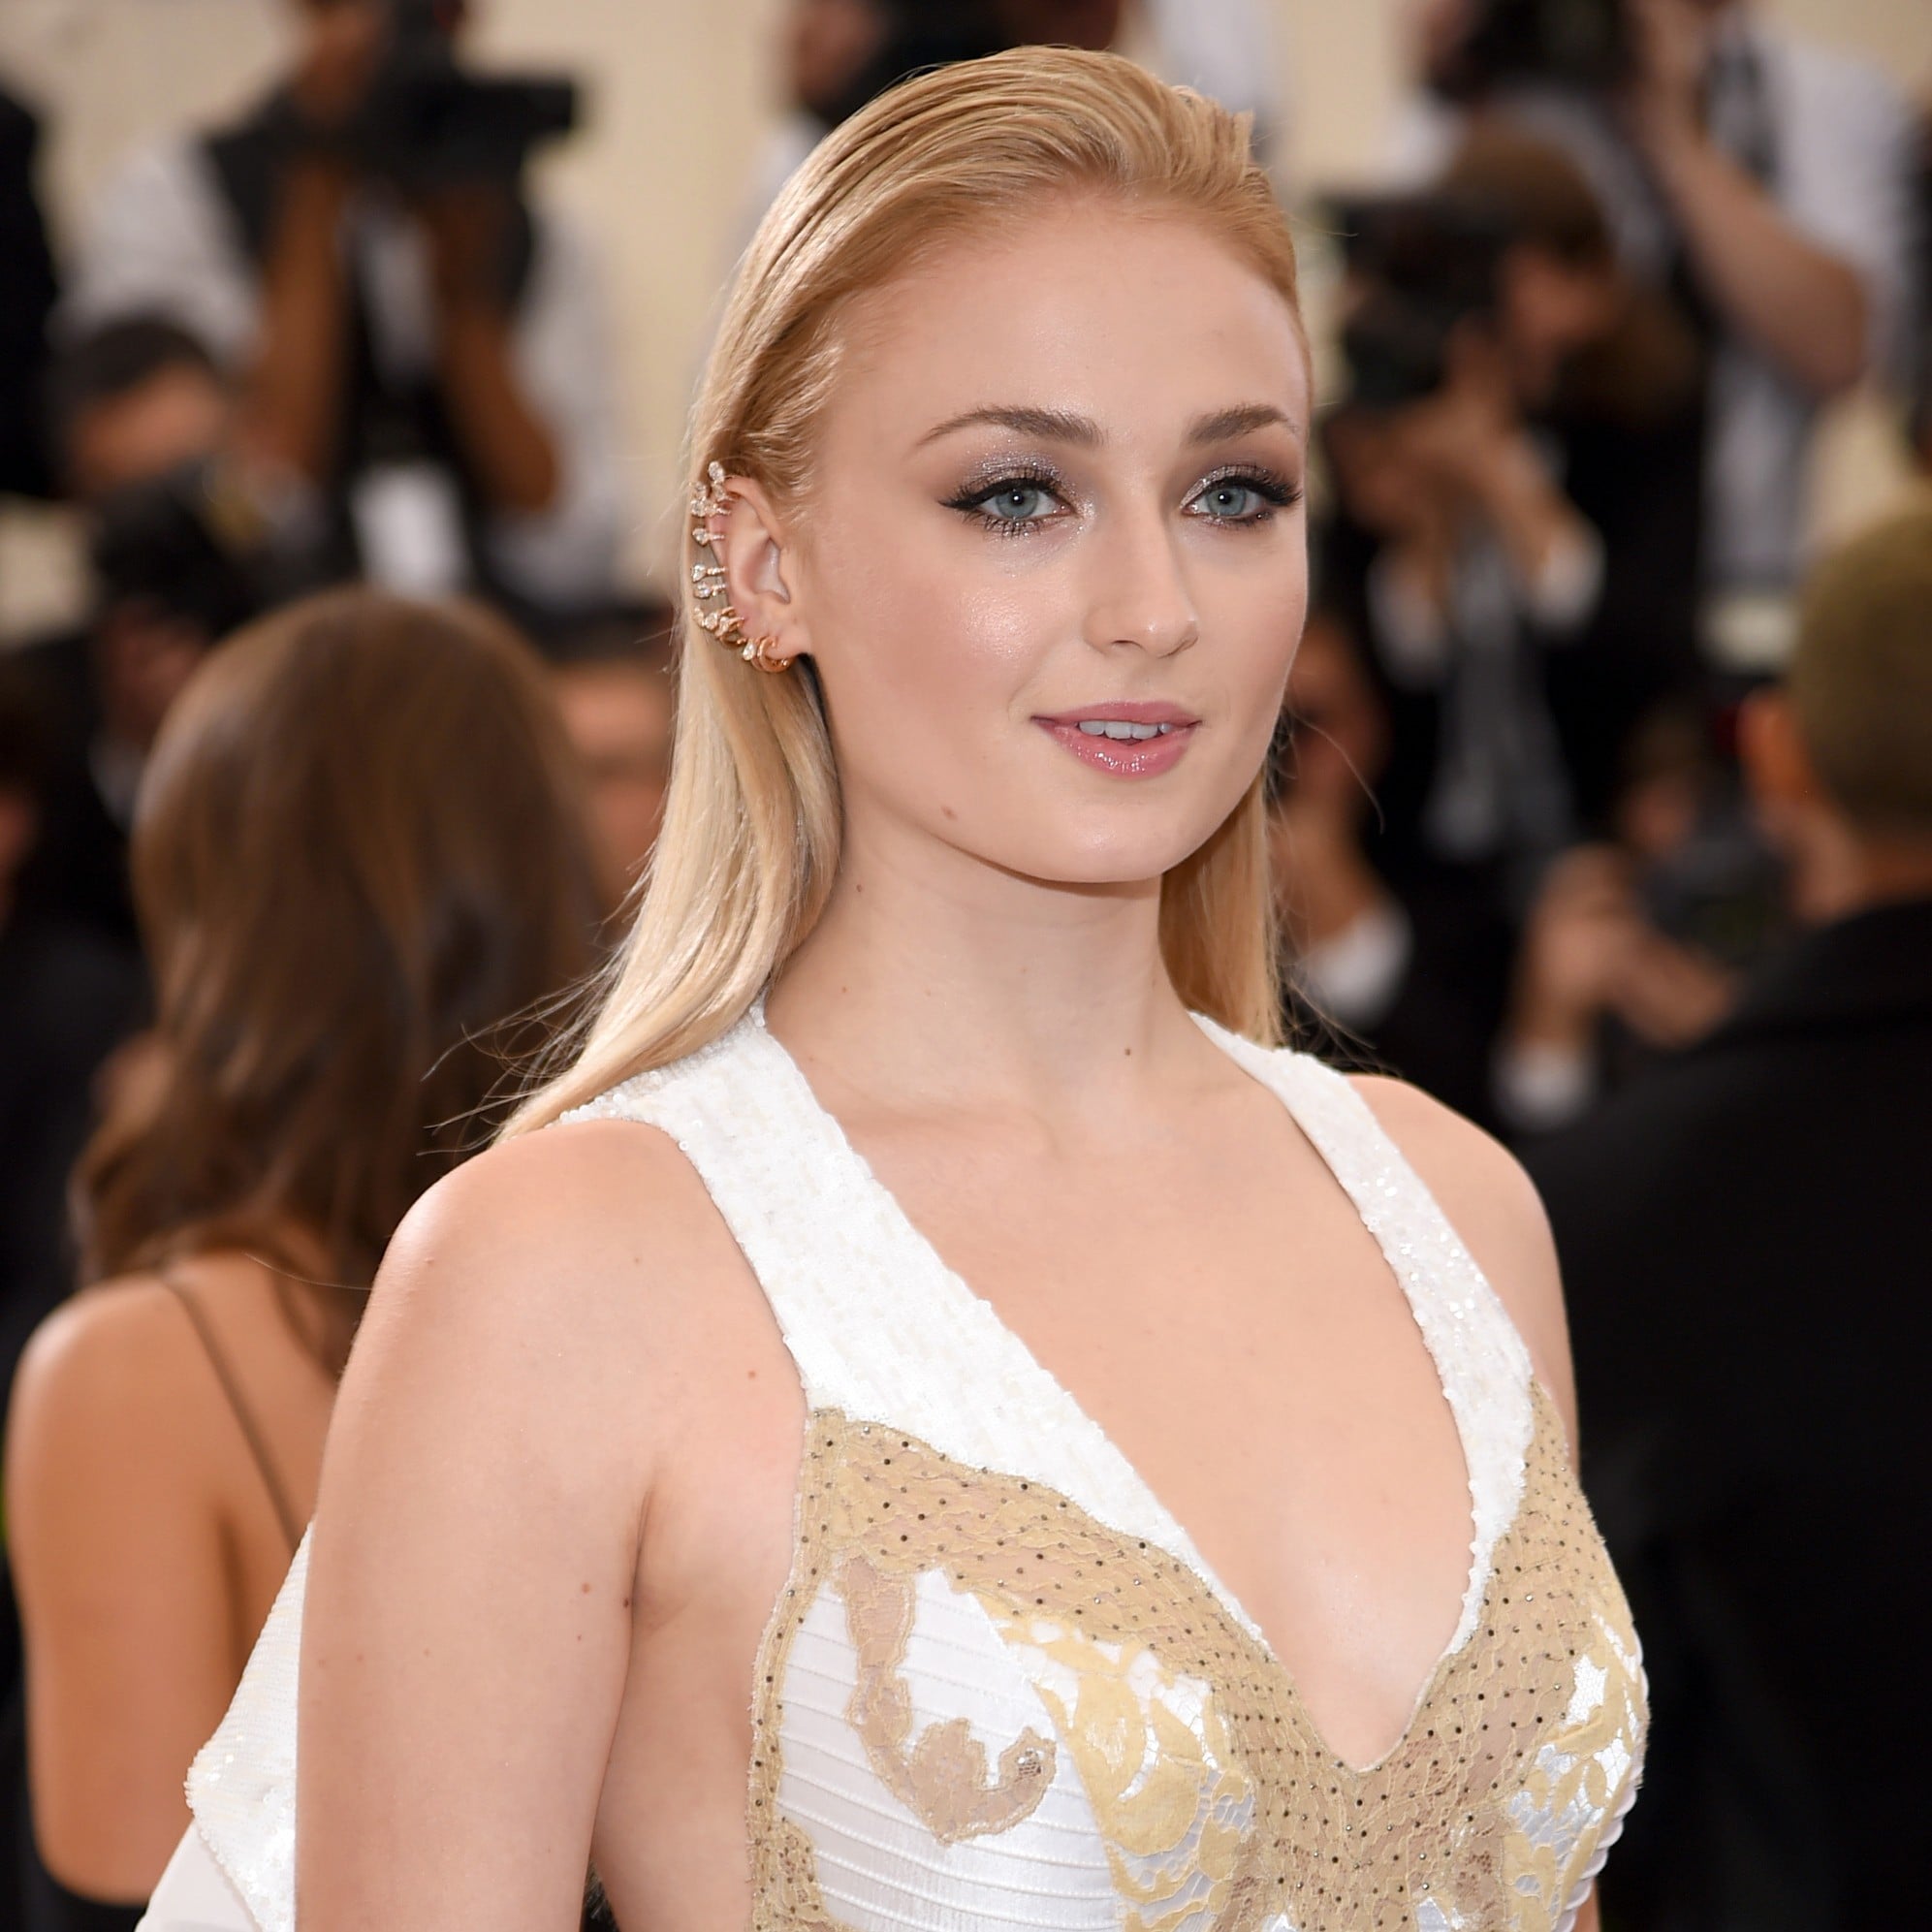 Met Gala 2017: GoT's Sophie Turner flashes cleavage in plunging gown, Celebrity News, Showbiz & TV